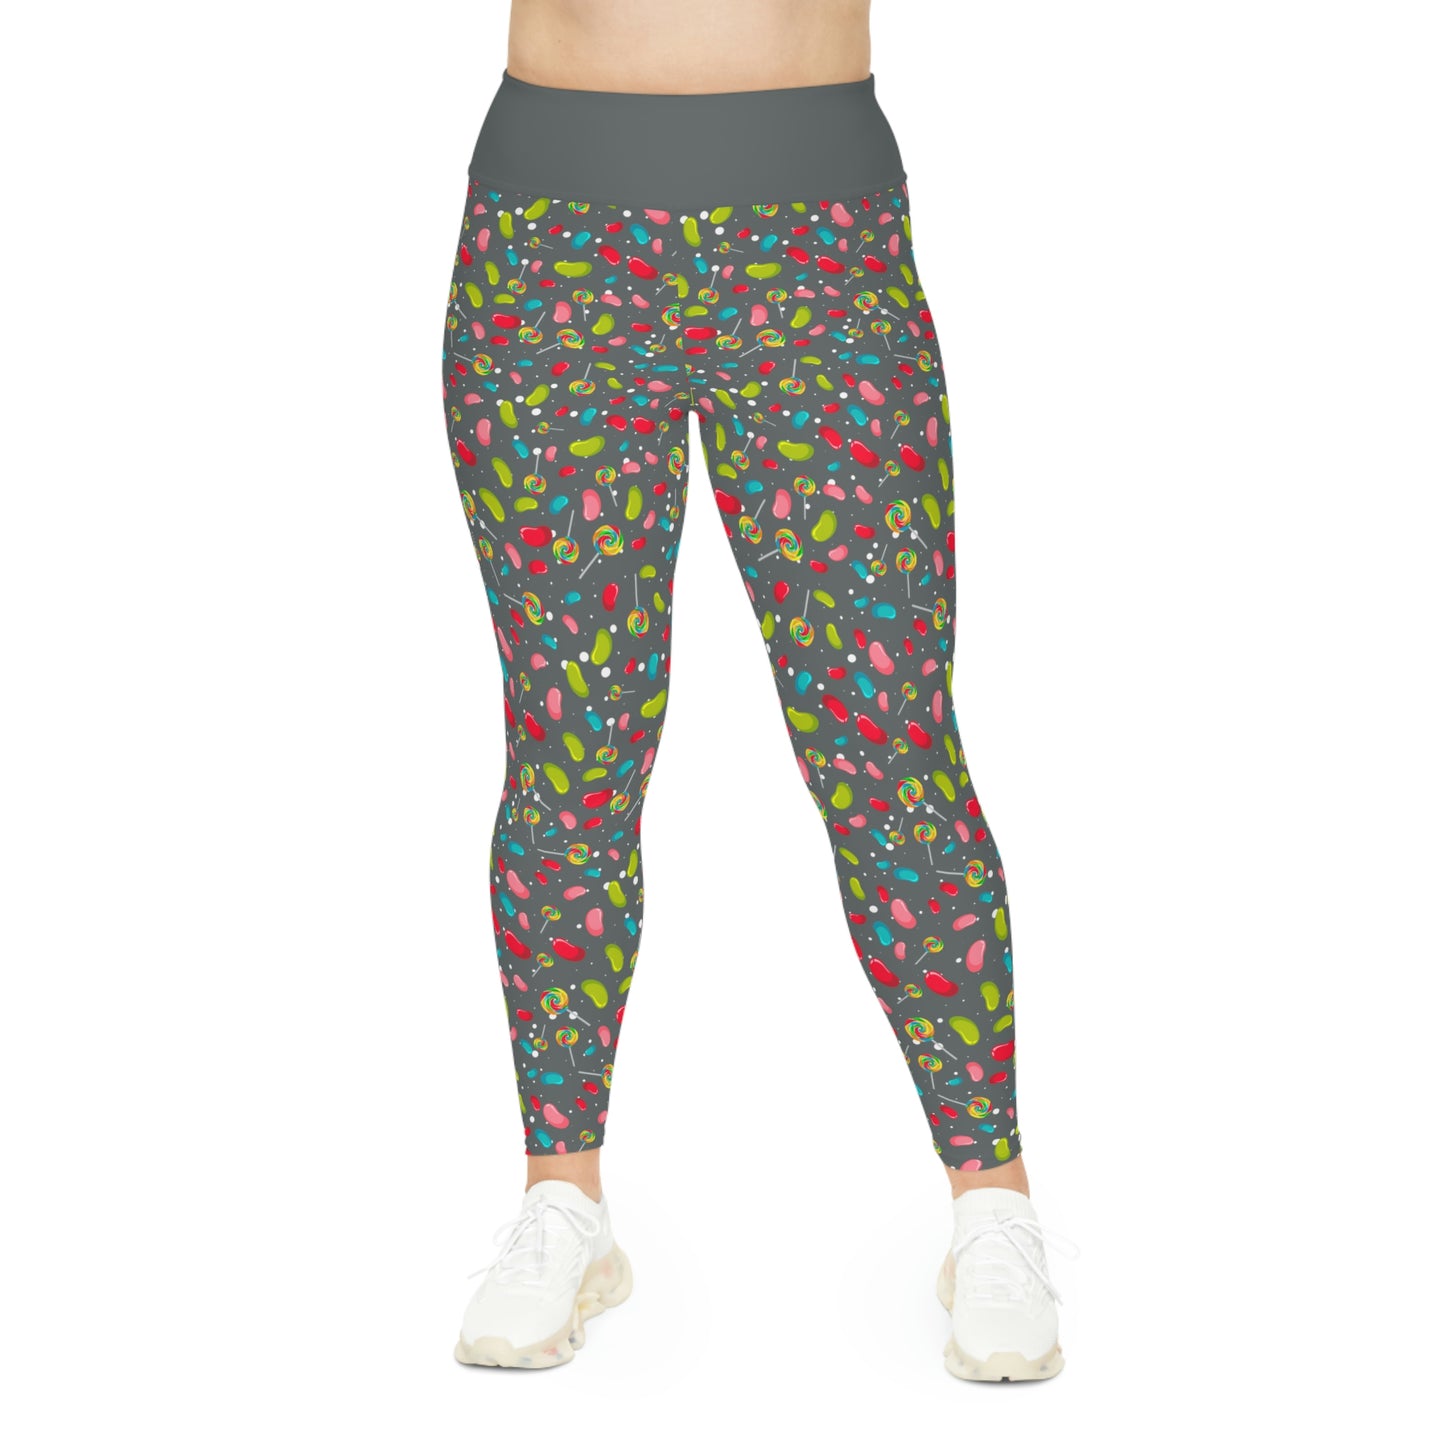 Candy Summer Plus Size Leggings One of a Kind Gift - Unique Workout Activewear tights for Mom fitness, Mothers Day, Girlfriend Christmas Gift